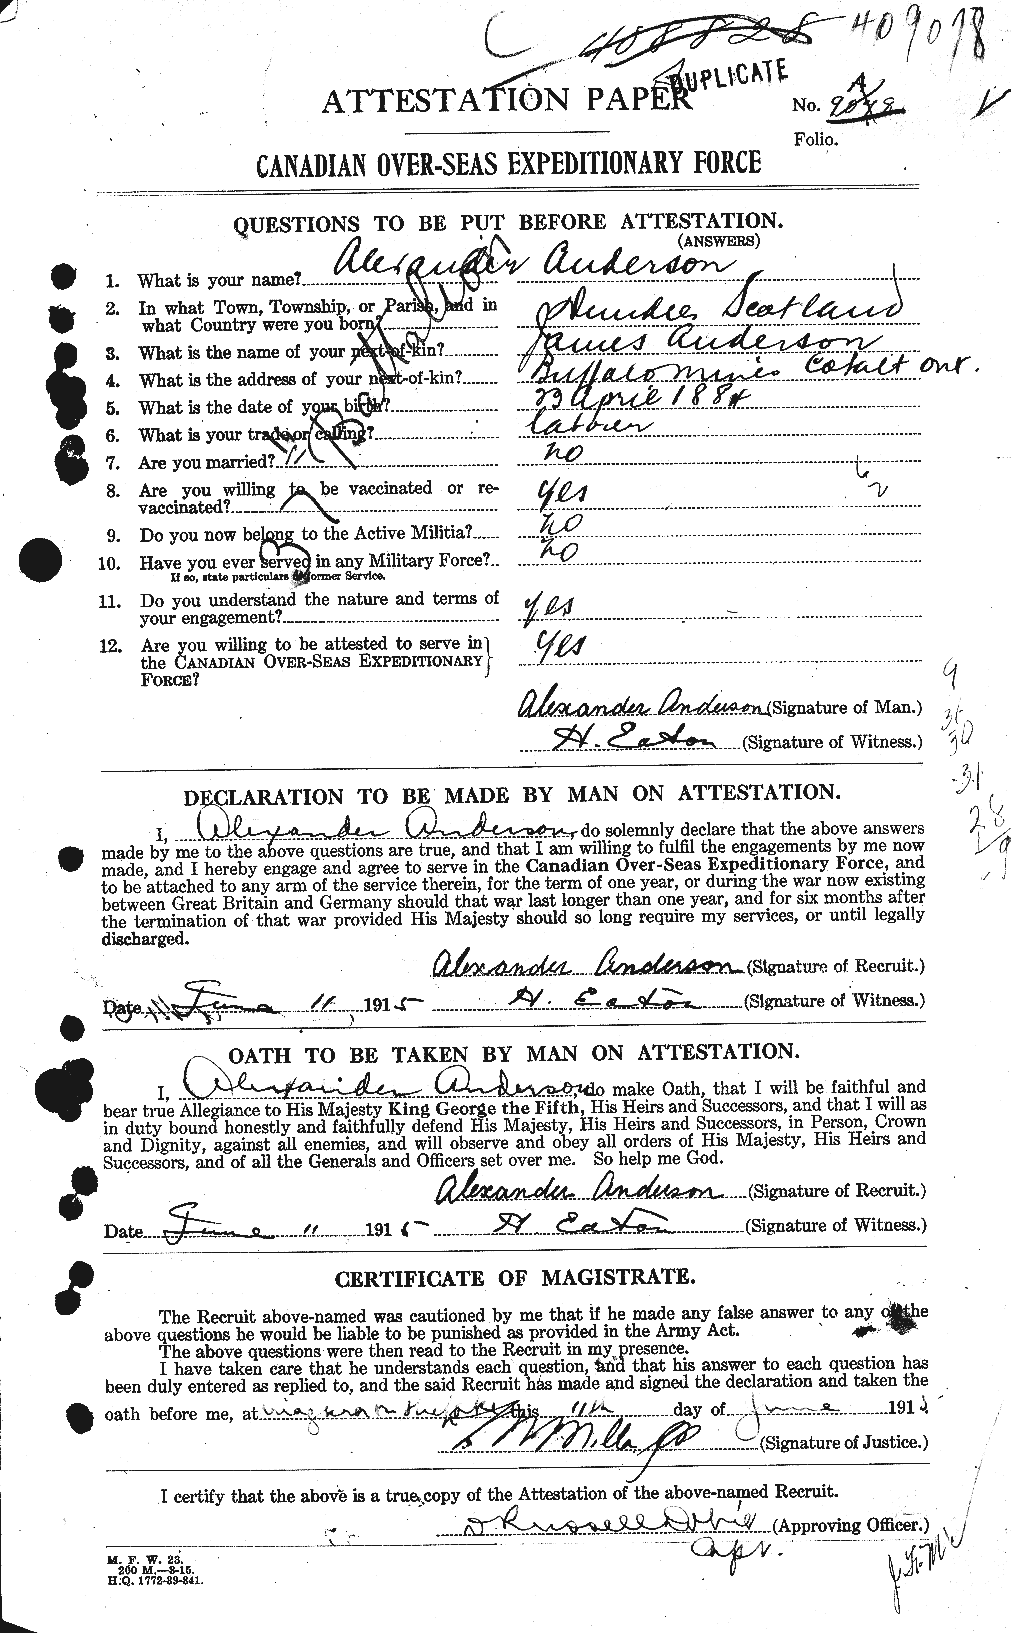 Personnel Records of the First World War - CEF 209514a